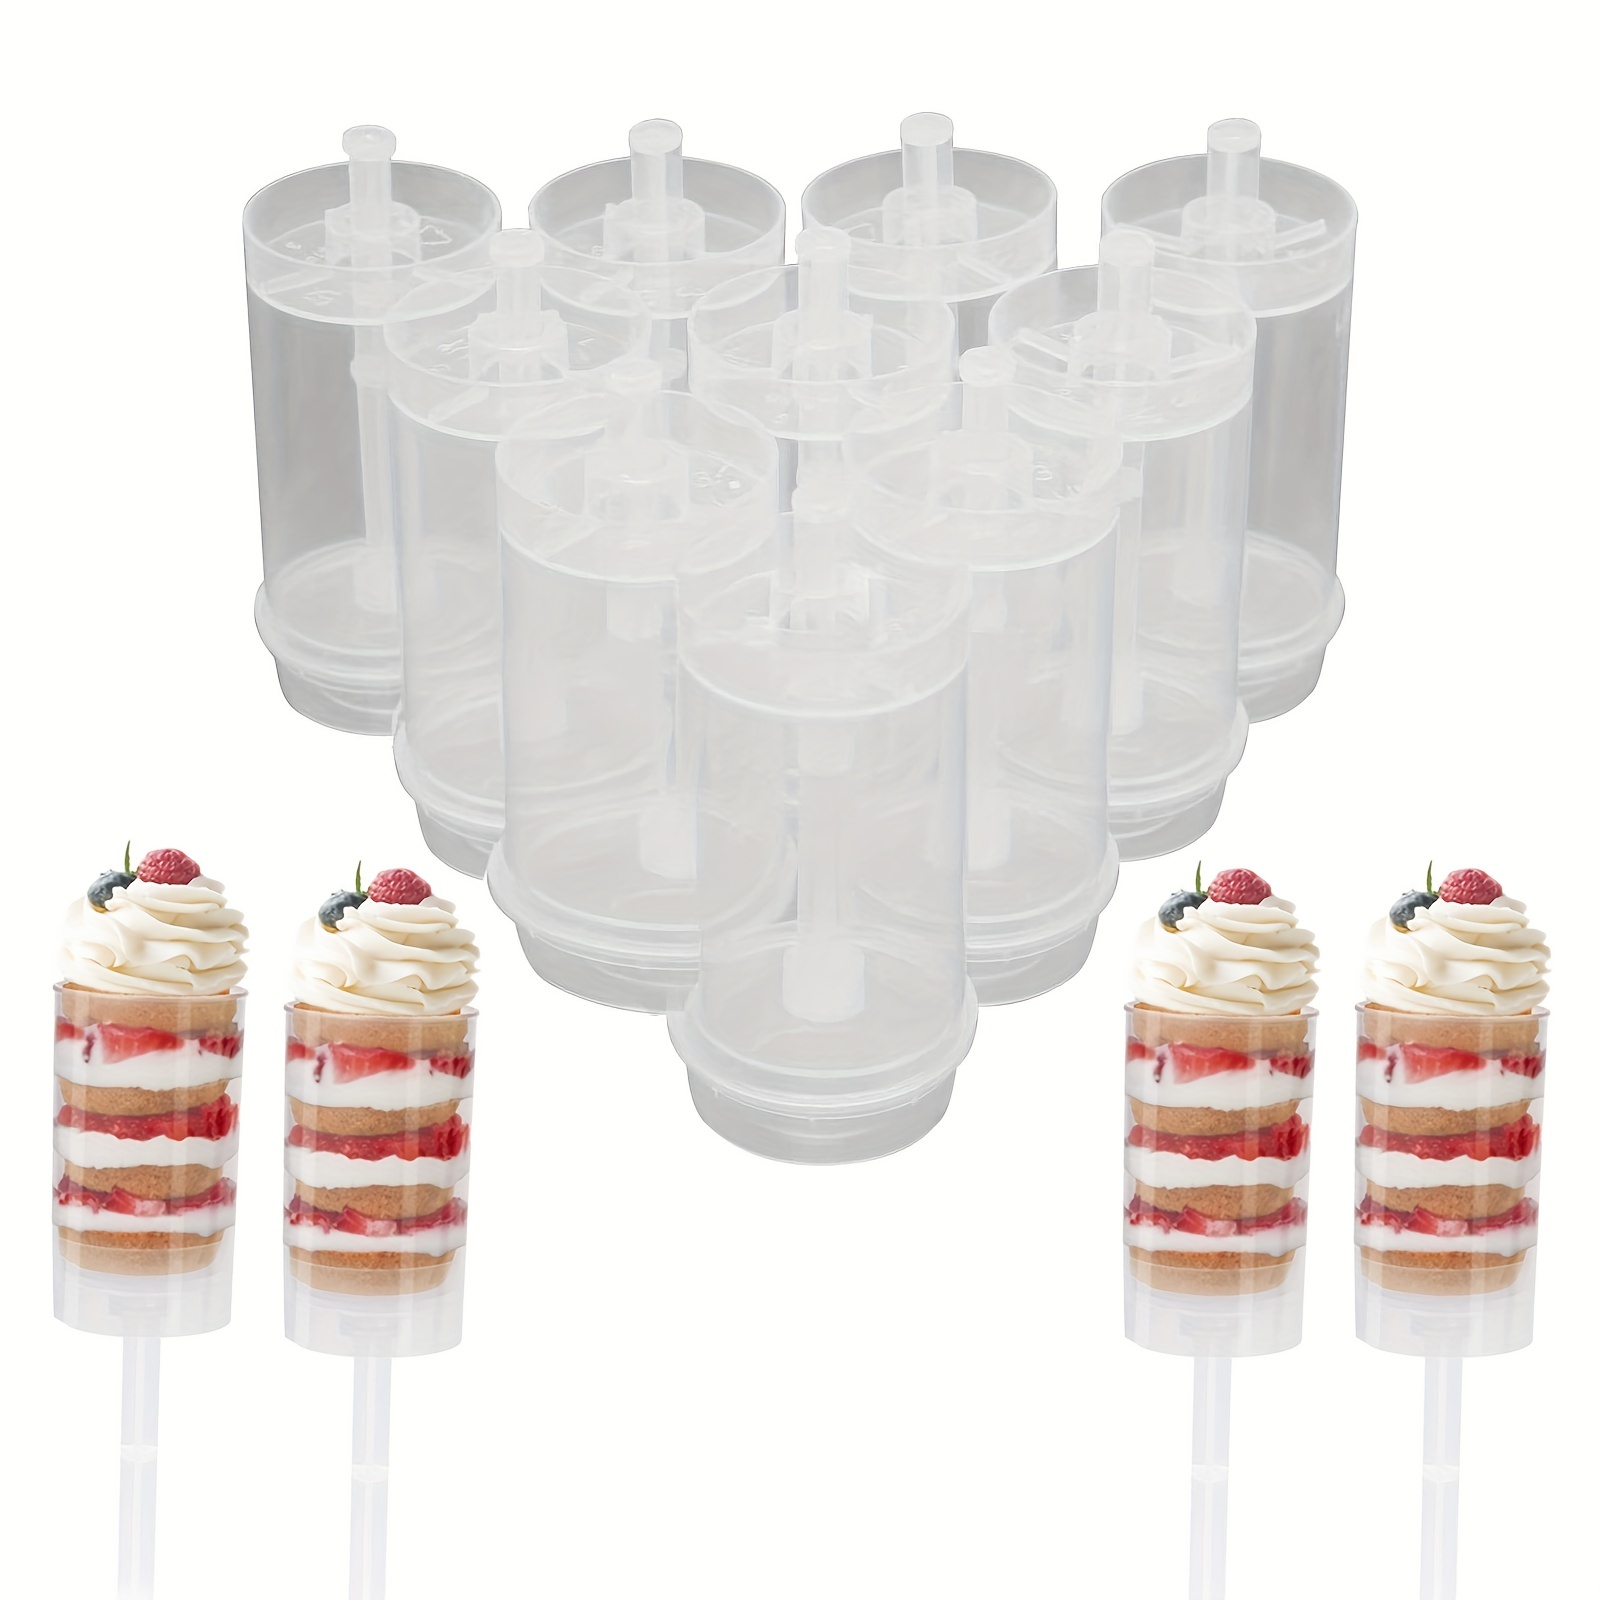 30 Hole Push Pop Cake Stand and 30 Packs Push up Cake Pop Shooter Plastic  Pop Containers Cake Pop Holder with LED Lights for Halloween Wedding Candy